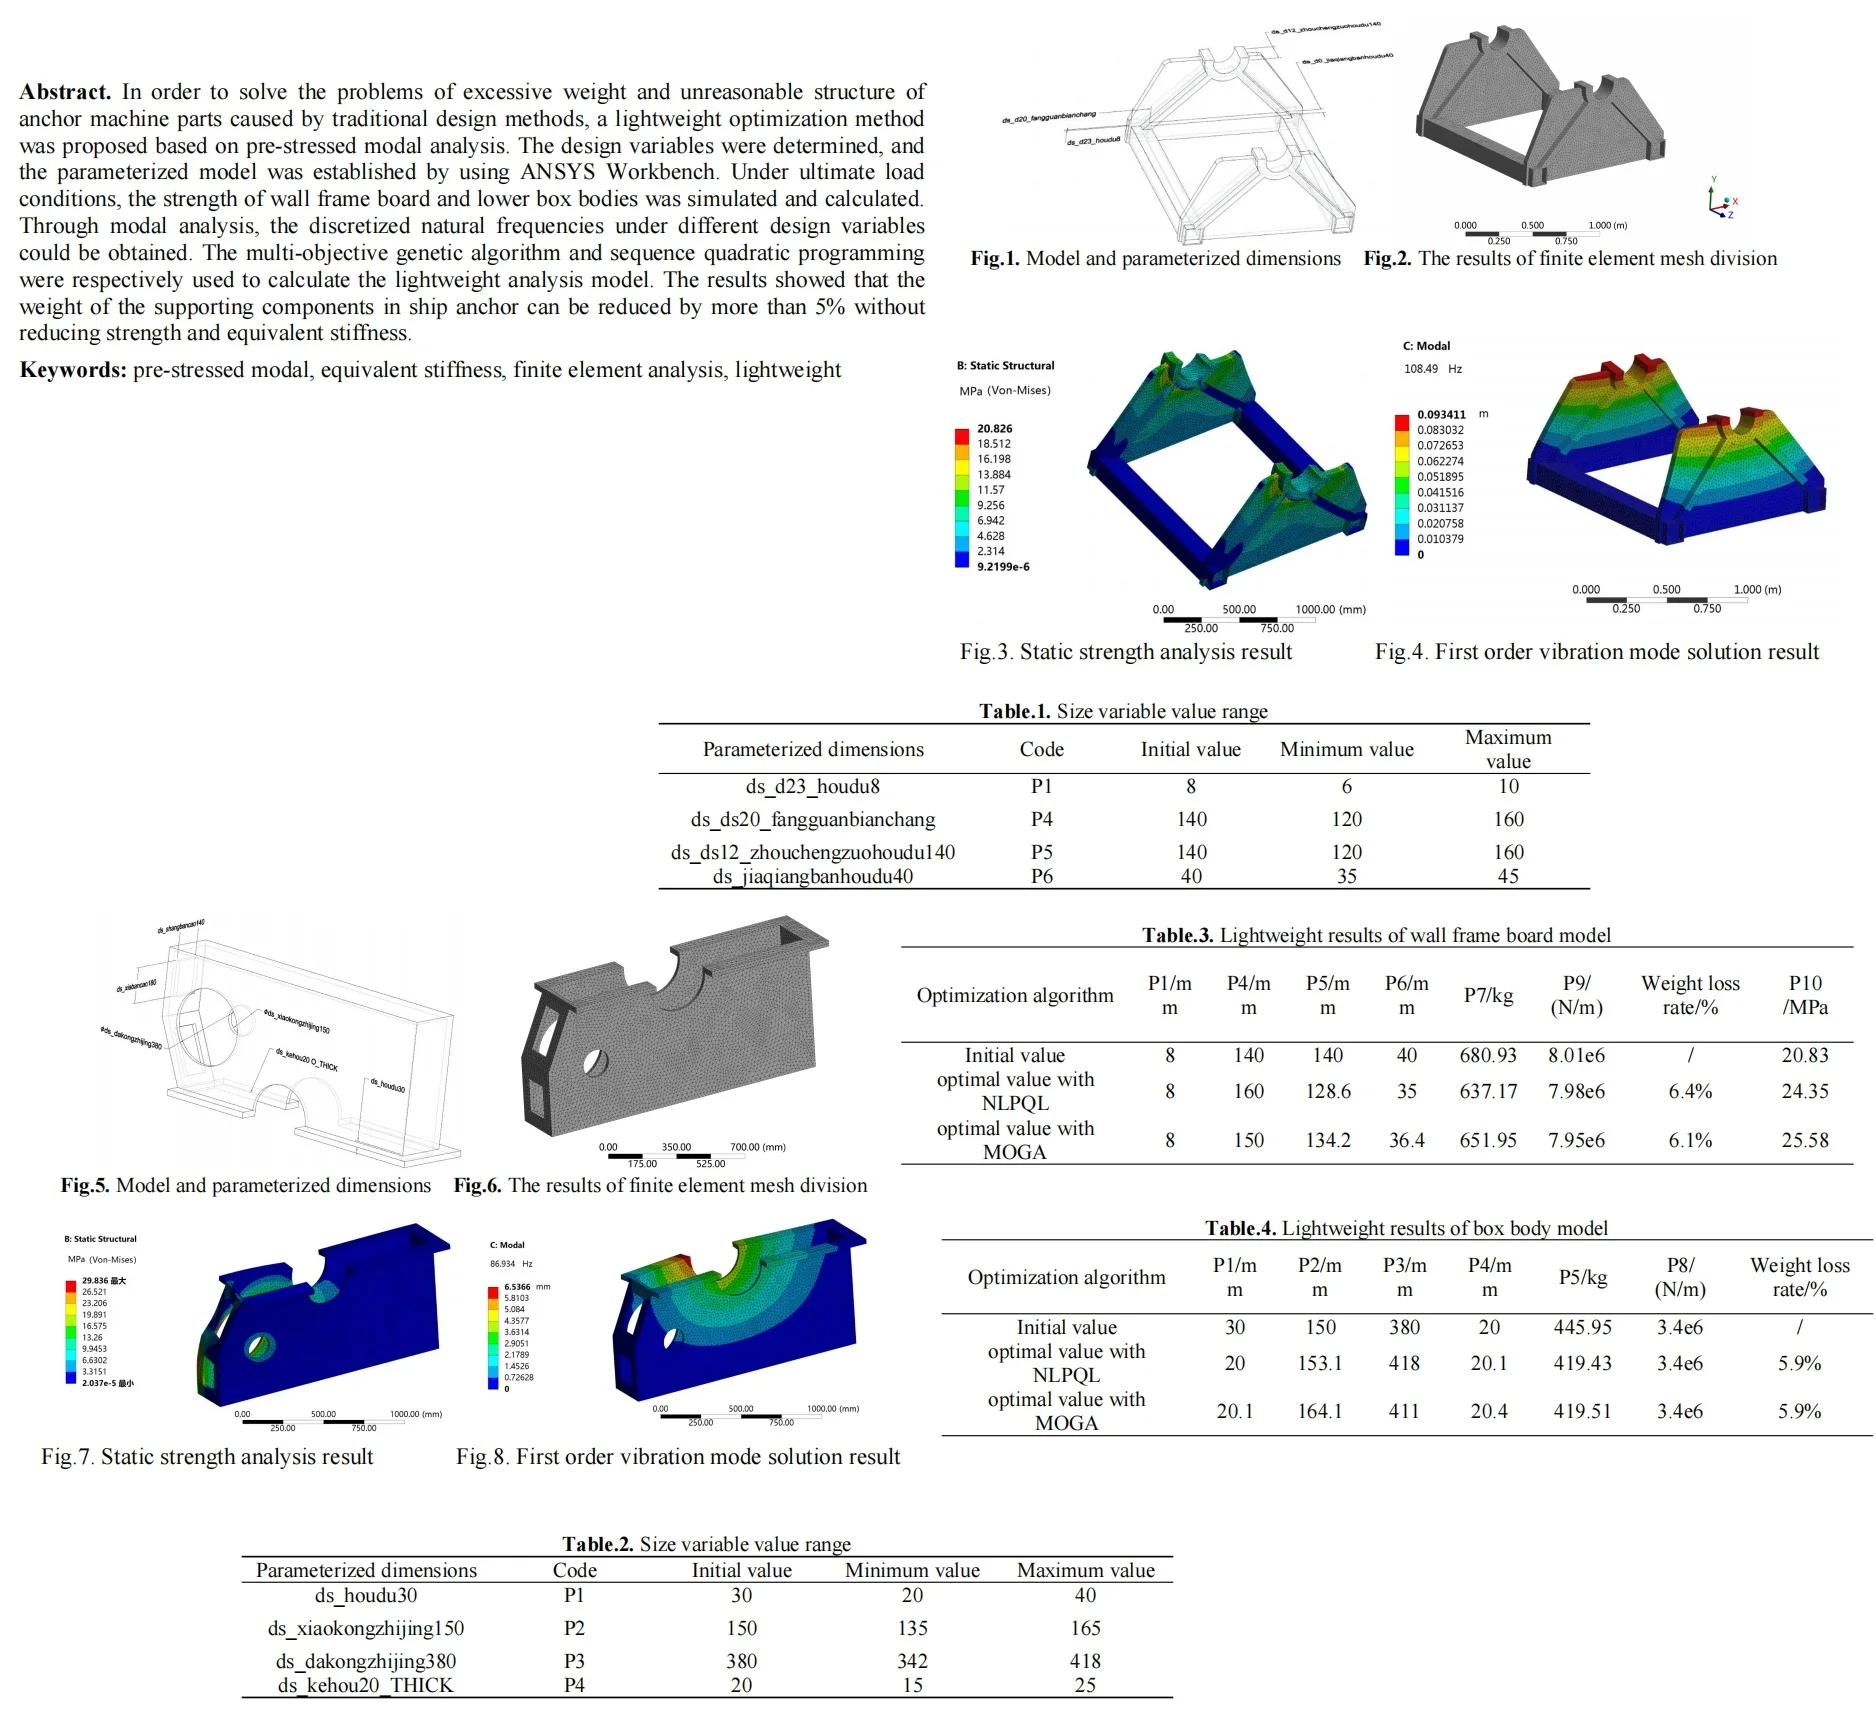 Analysis and optimization of pre-stressed modal features of ship anchor support parts